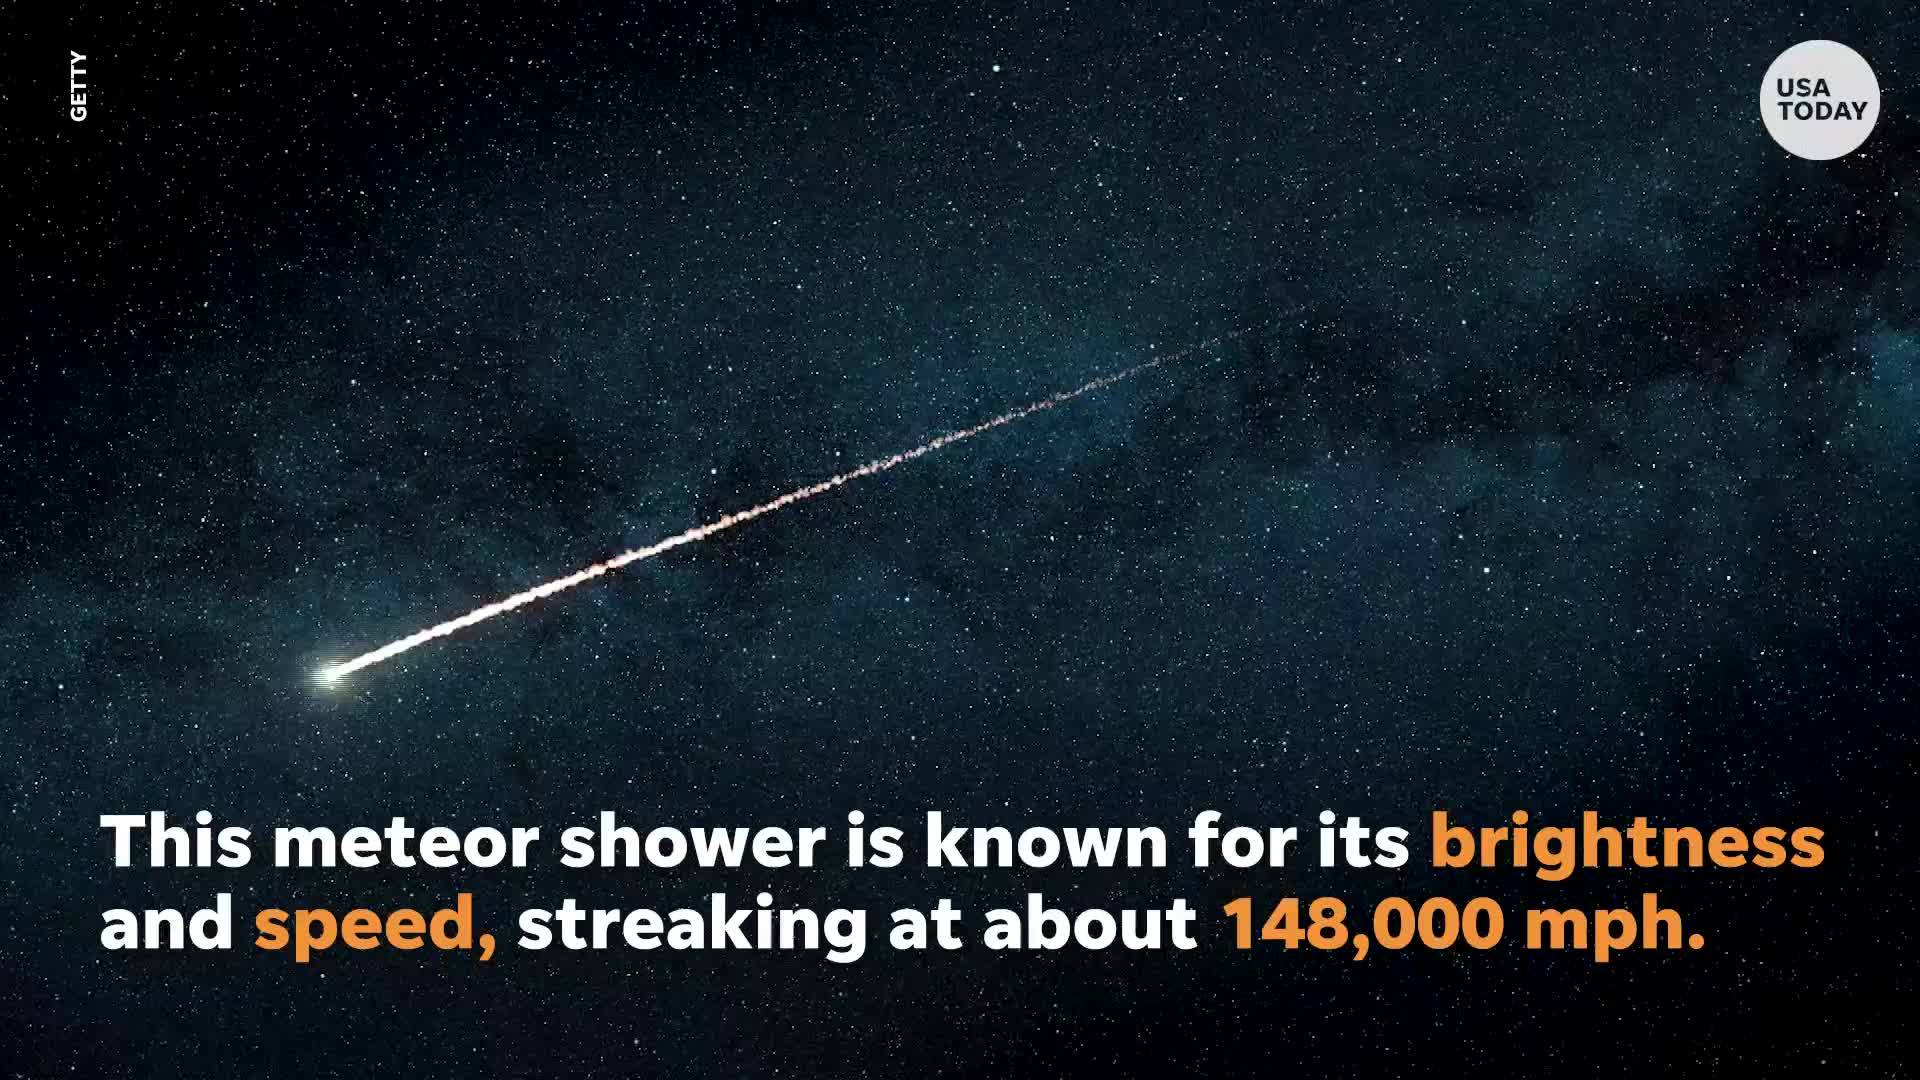 The Orionid meteor shower will dazzle early Friday, courtesy of Halleys Comet